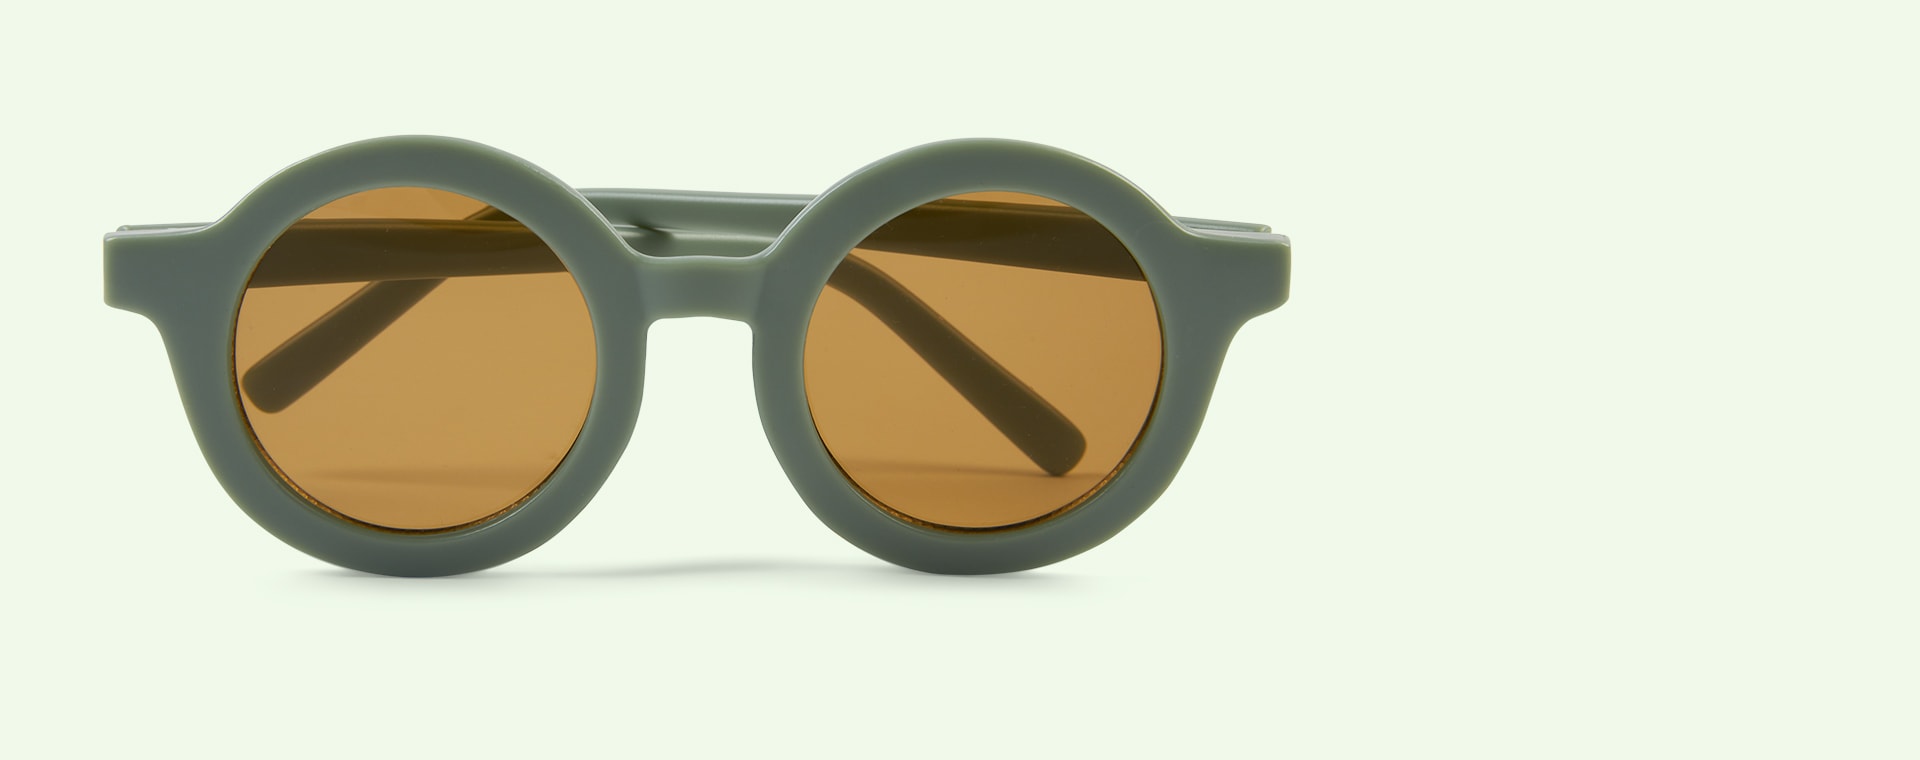 Fern Grech & Co Sustainable Sunglasses